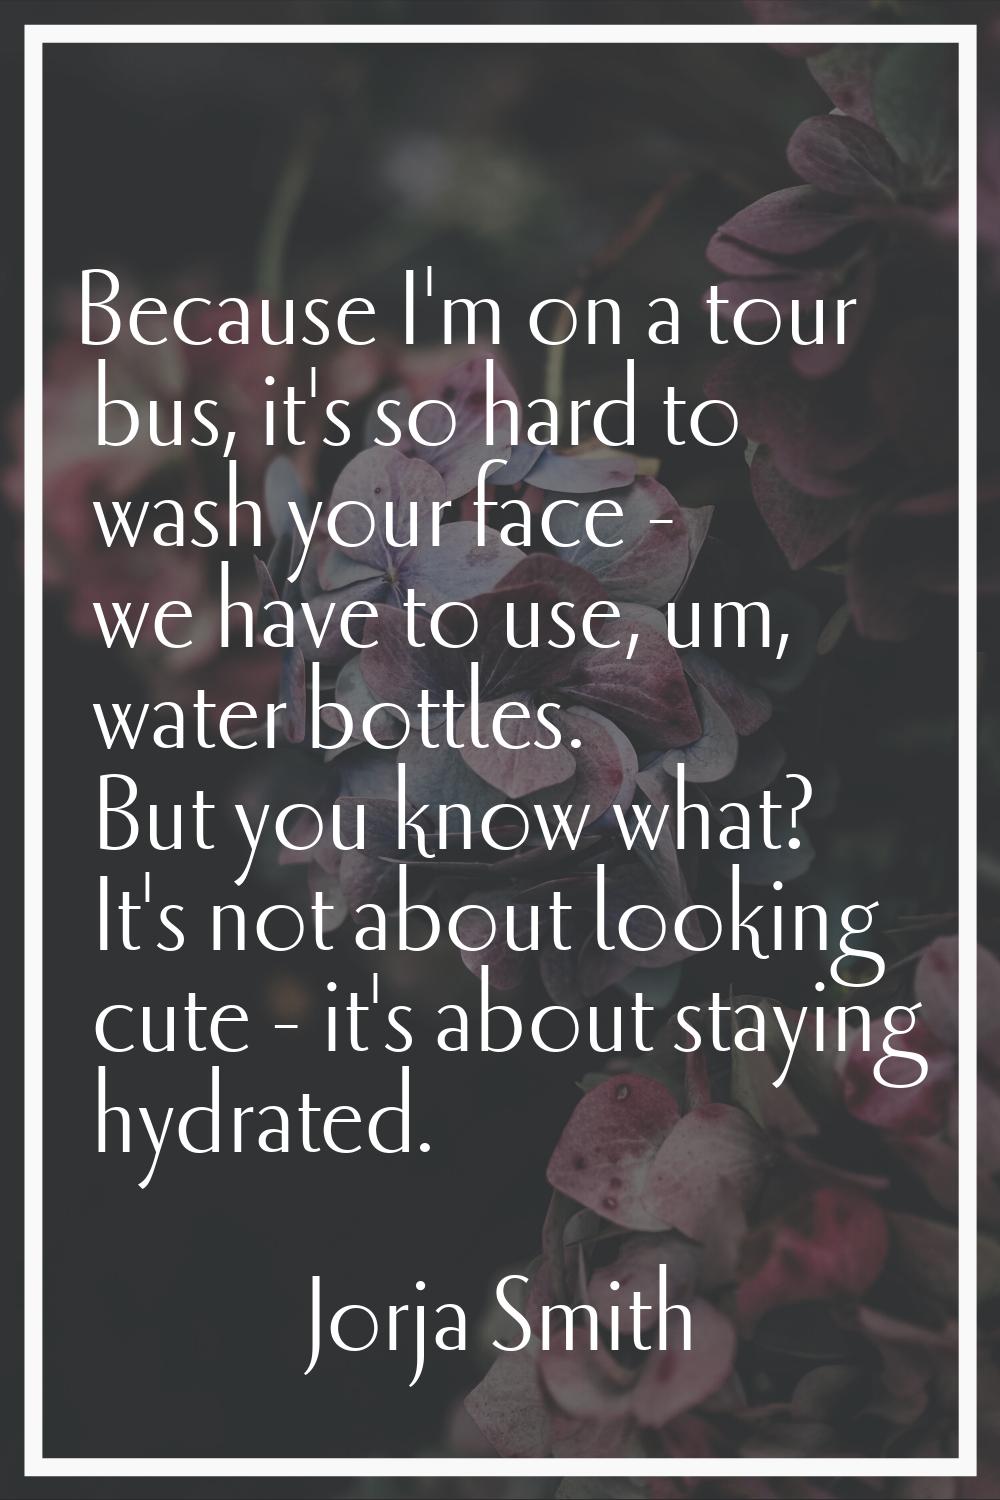 Because I'm on a tour bus, it's so hard to wash your face - we have to use, um, water bottles. But 